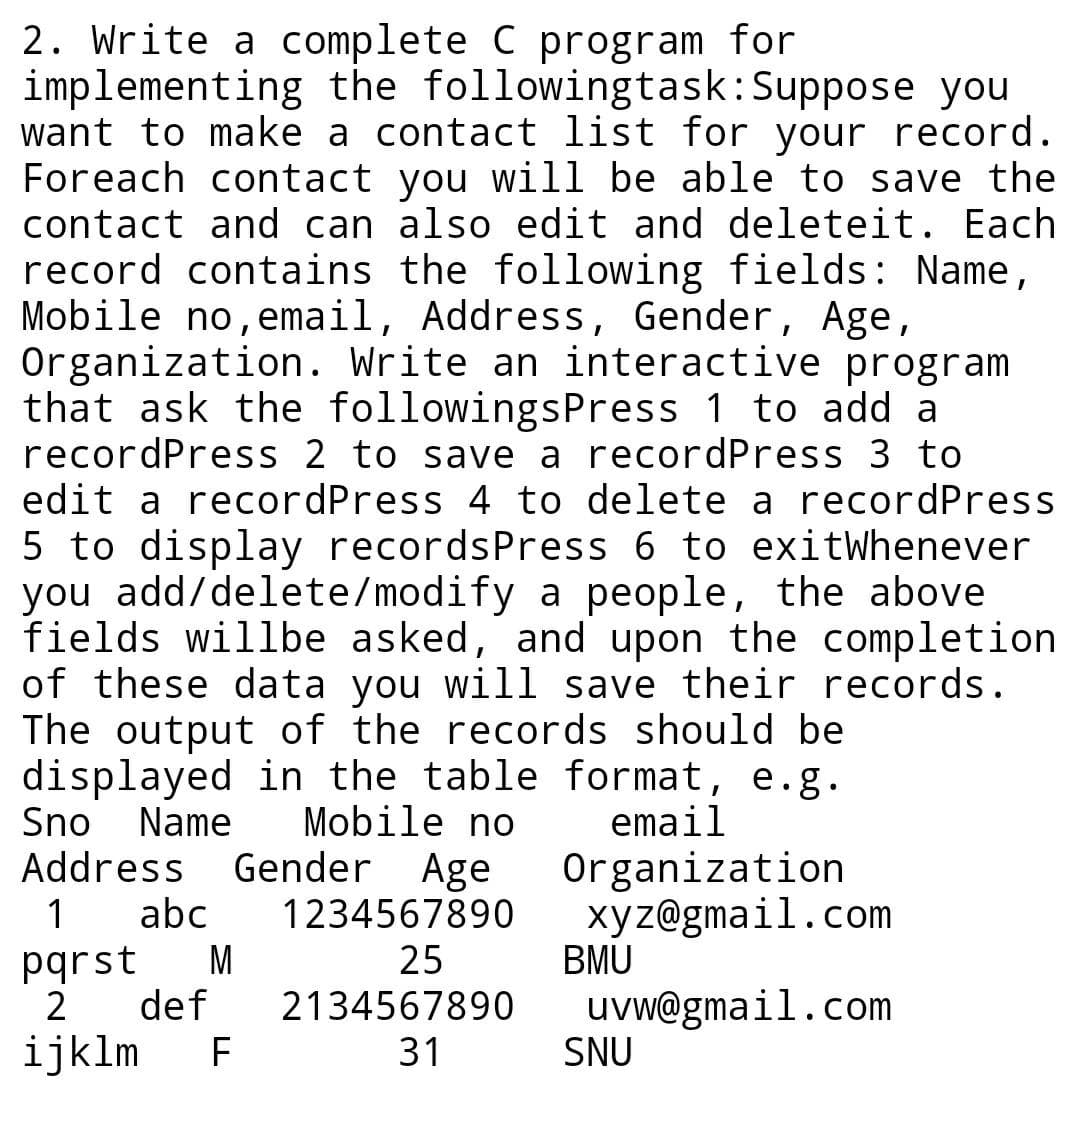 2. Write a complete C program for
implementing the followingtask:Suppose you
want to make a contact list for your record.
Foreach contact you will be able to save the
contact and can also edit and deleteit. Each
record contains the following fields: Name,
Mobile no,email, Address, Gender, Age,
Organization. Write an interactive program
that ask the followingsPress 1 to add a
recordPress 2 to save a recordPress 3 to
edit a recordPress 4 to delete a recordPress
5 to display recordsPress 6 to exitWhenever
you add/delete/modify a people, the above
fields willbe asked, and upon the completion
of these data you will save their records.
The output of the records should be
displayed in the table format, e.g.
Sno
Address
Name
Mobile no
Gender Age
abc
email
Organization
xyz@gmail.com
BMU
1234567890
pqrst
M
25
uvw@gmail.com
SNU
2
def
2134567890
ijklm
F
31
